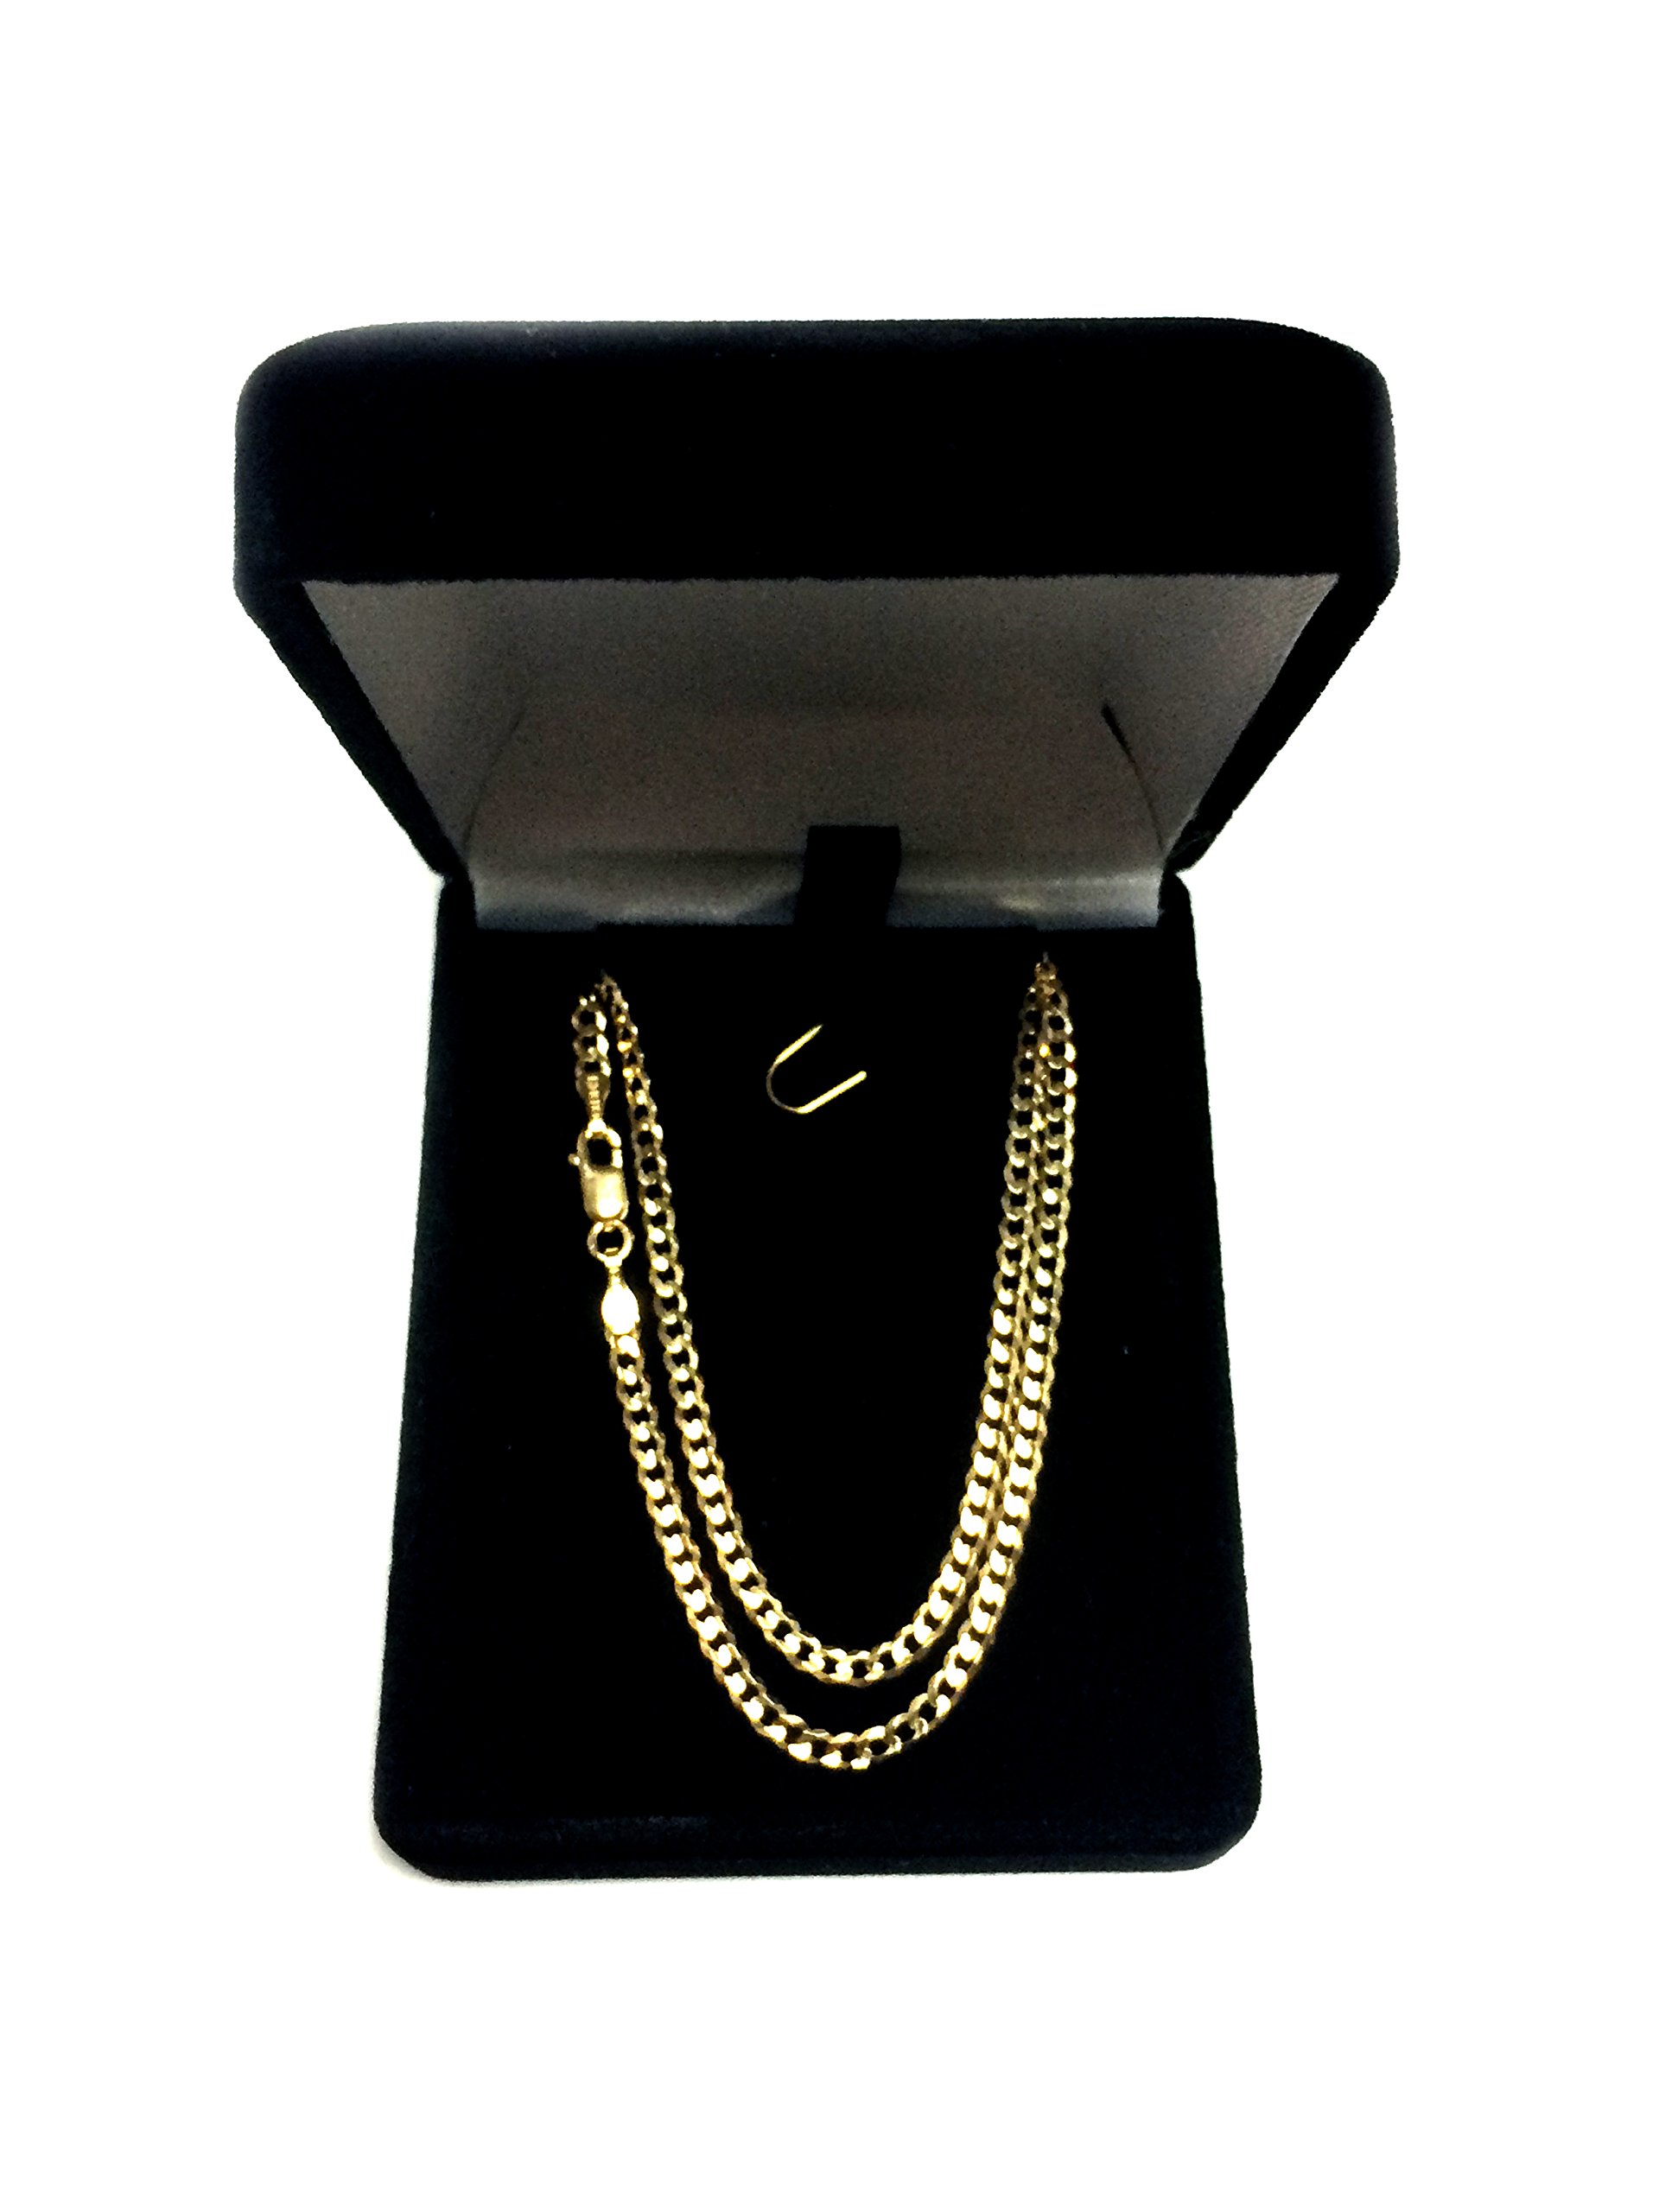 Jewelry Affairs 14k Real Solid Yellow Gold Comfort Curb Chain Necklace, 2.7mm